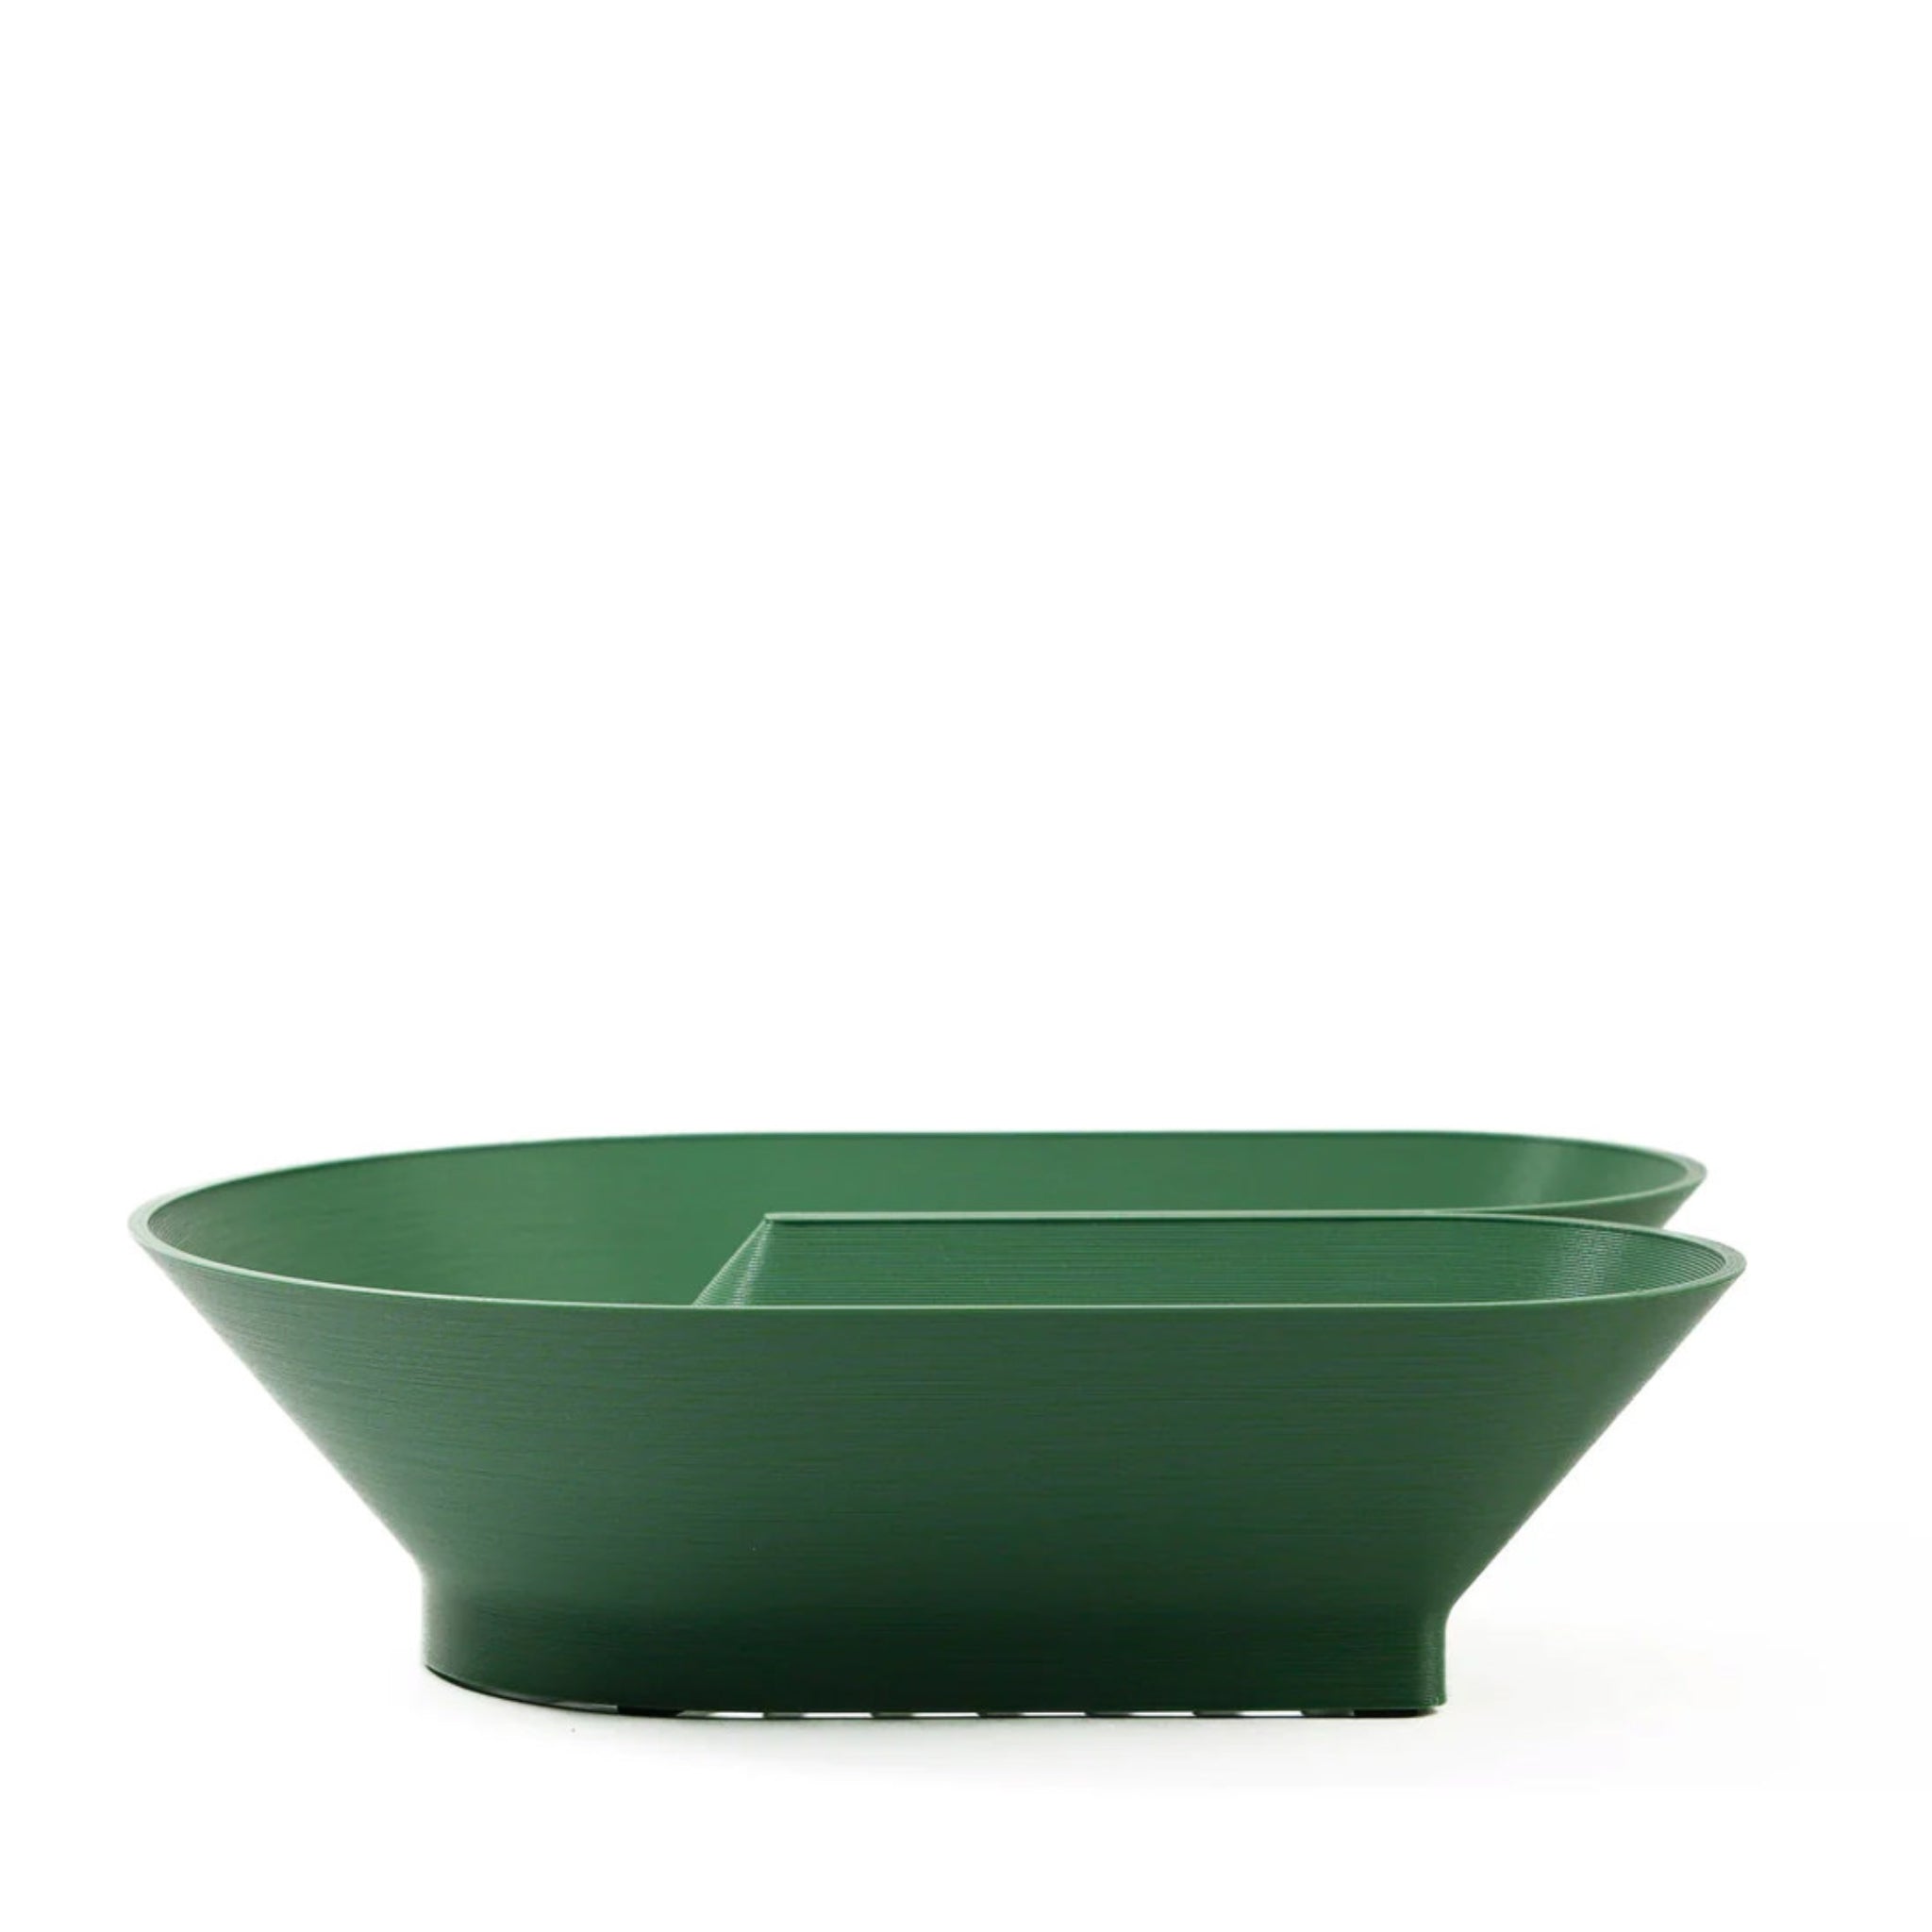 Cyrc U fruit bowl in evergreen. 3D printed recycled plastic. Product placed in front of a white background